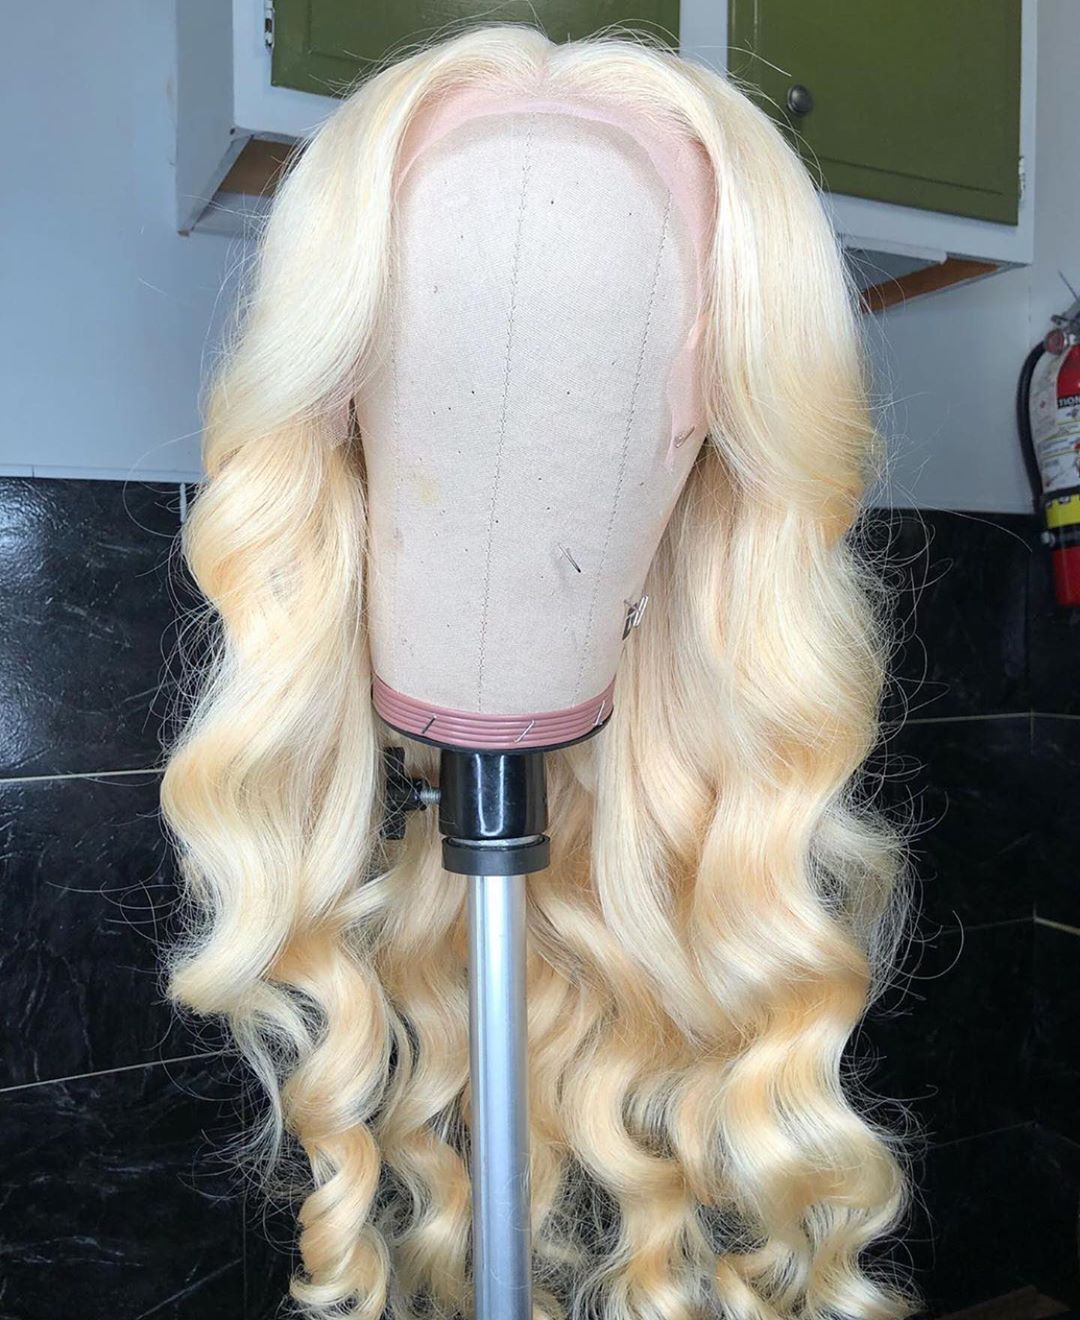 613 Honey Blonde13x4 Lace Front Wig Body Wave Human Hair Wig Remy Pre Plucked Brazilian Hair Frontal Wig For Women Honey Blonde13x4 Lace Front Wig Body Wave Human Hair Wig Remy Pre Plucked Brazilian Hair Frontal Wig For Women